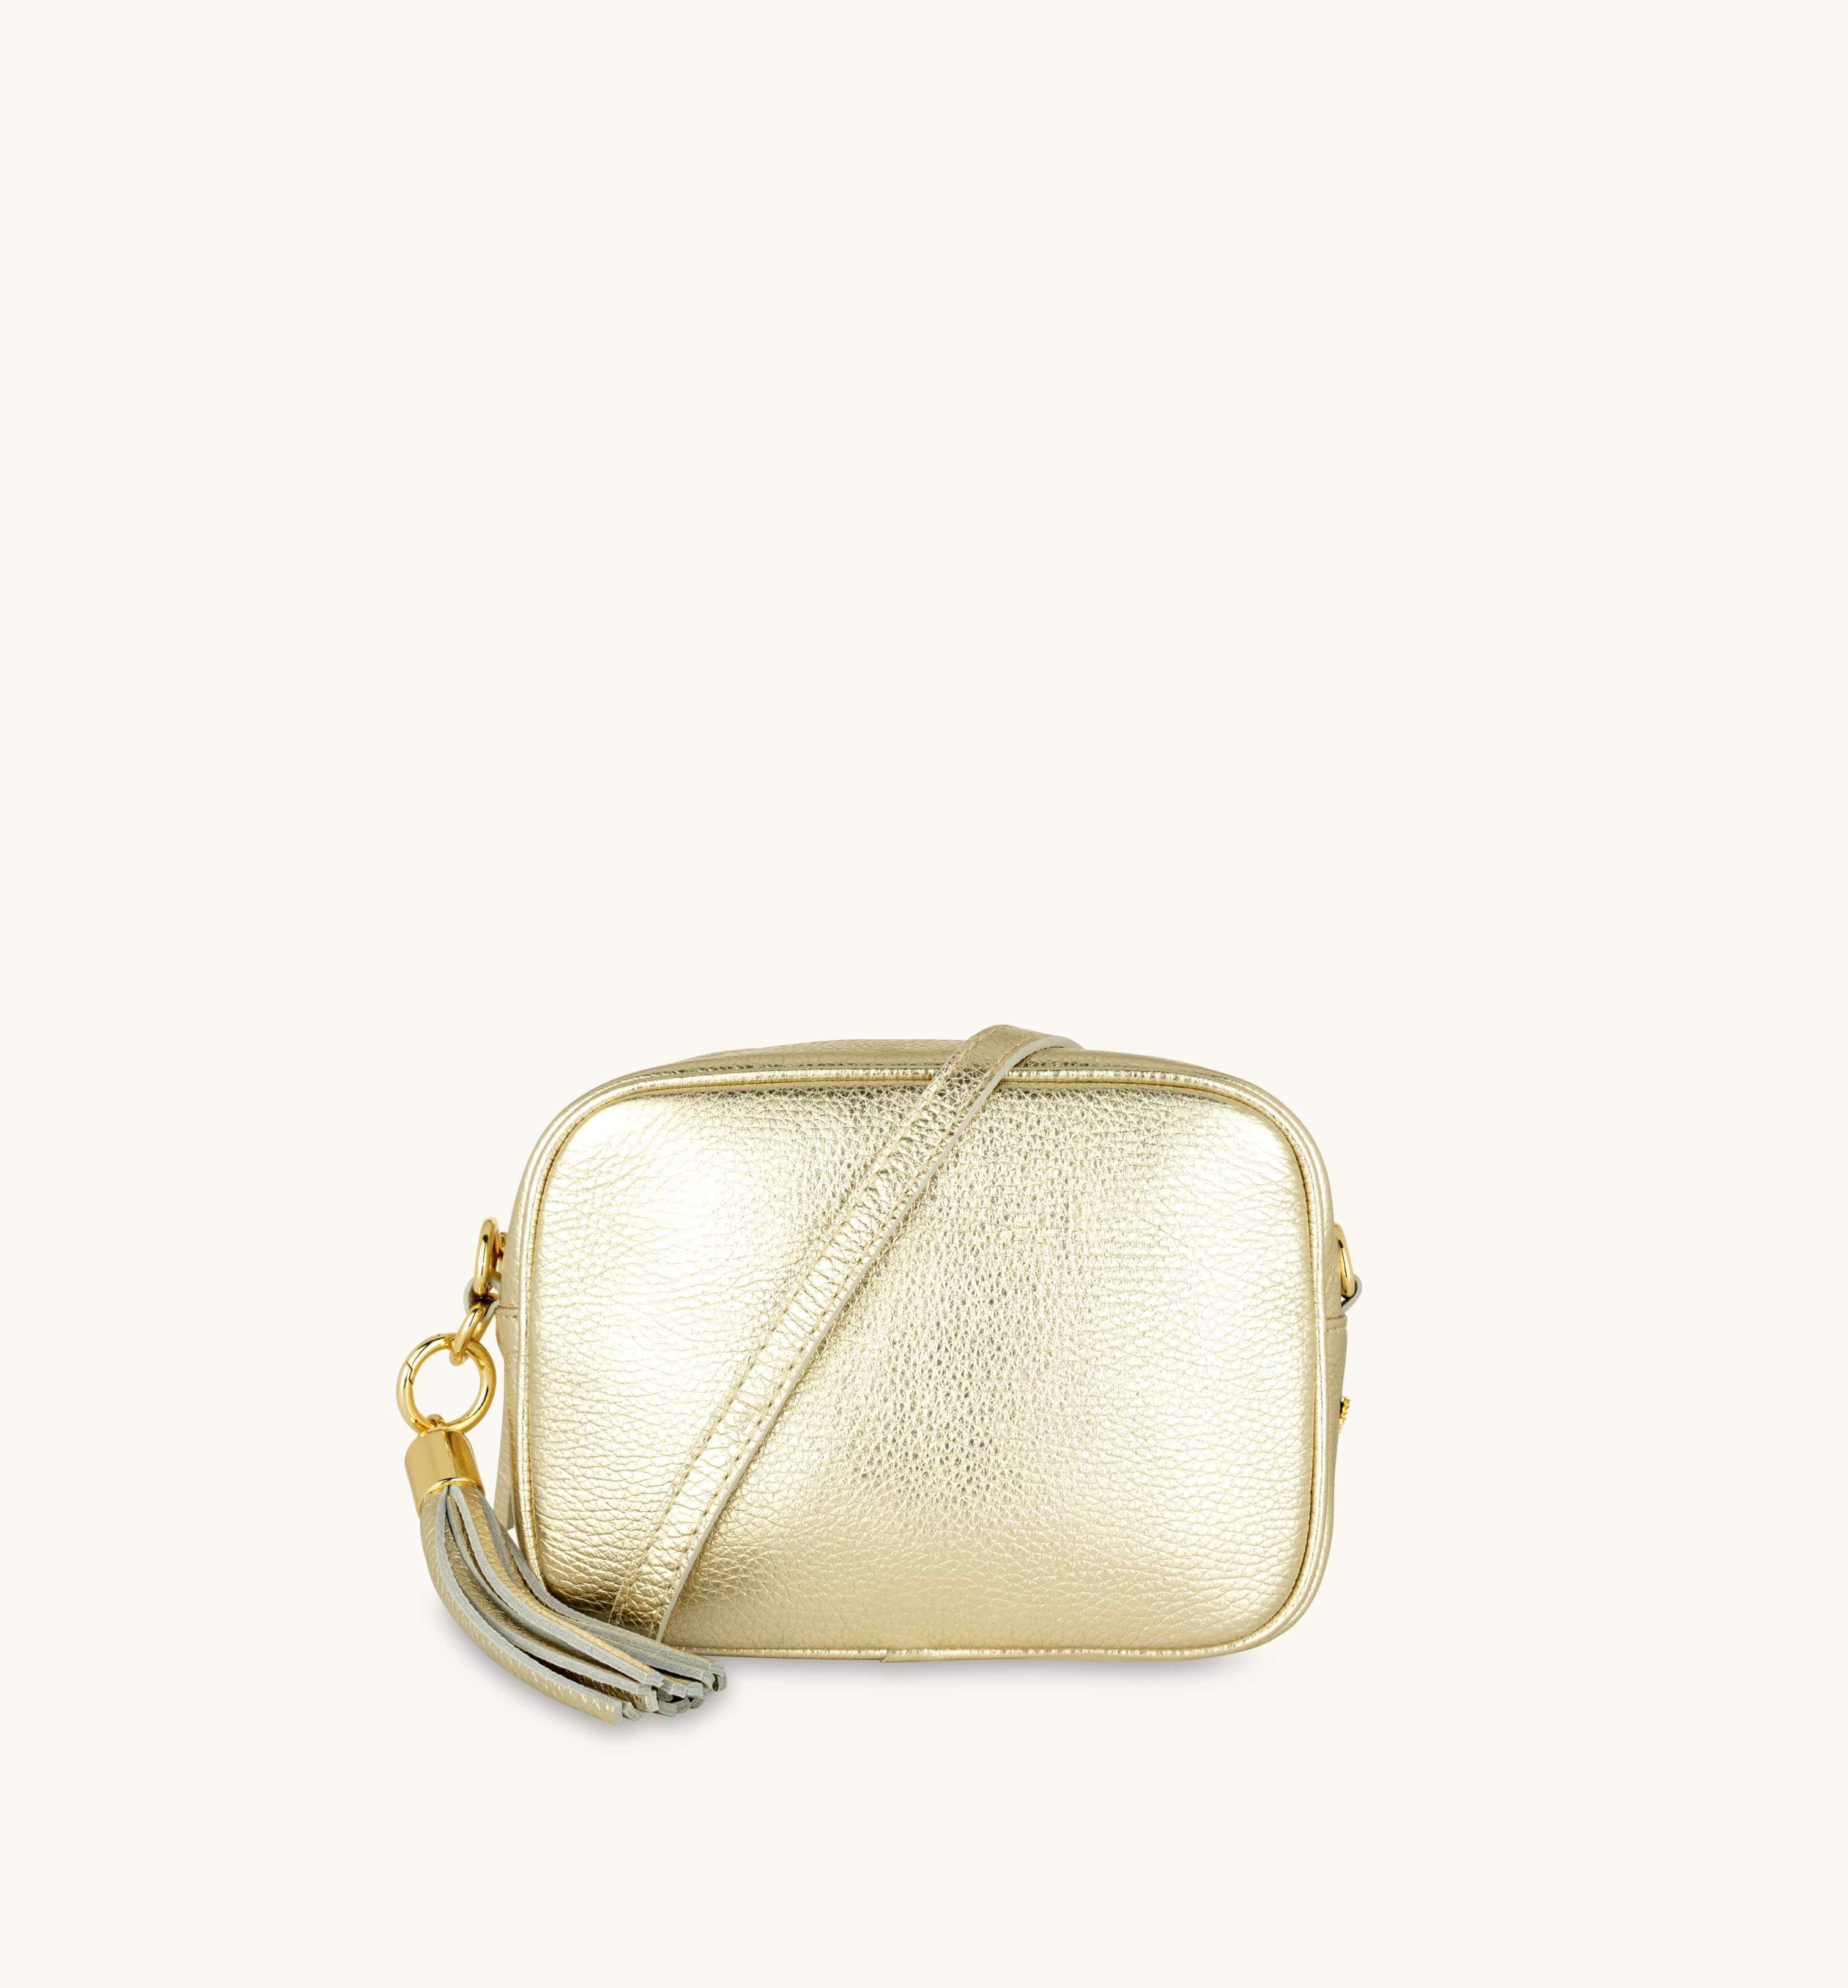 The Tassel Gold Leather Crossbody Bag With Tan Cheetah Strap